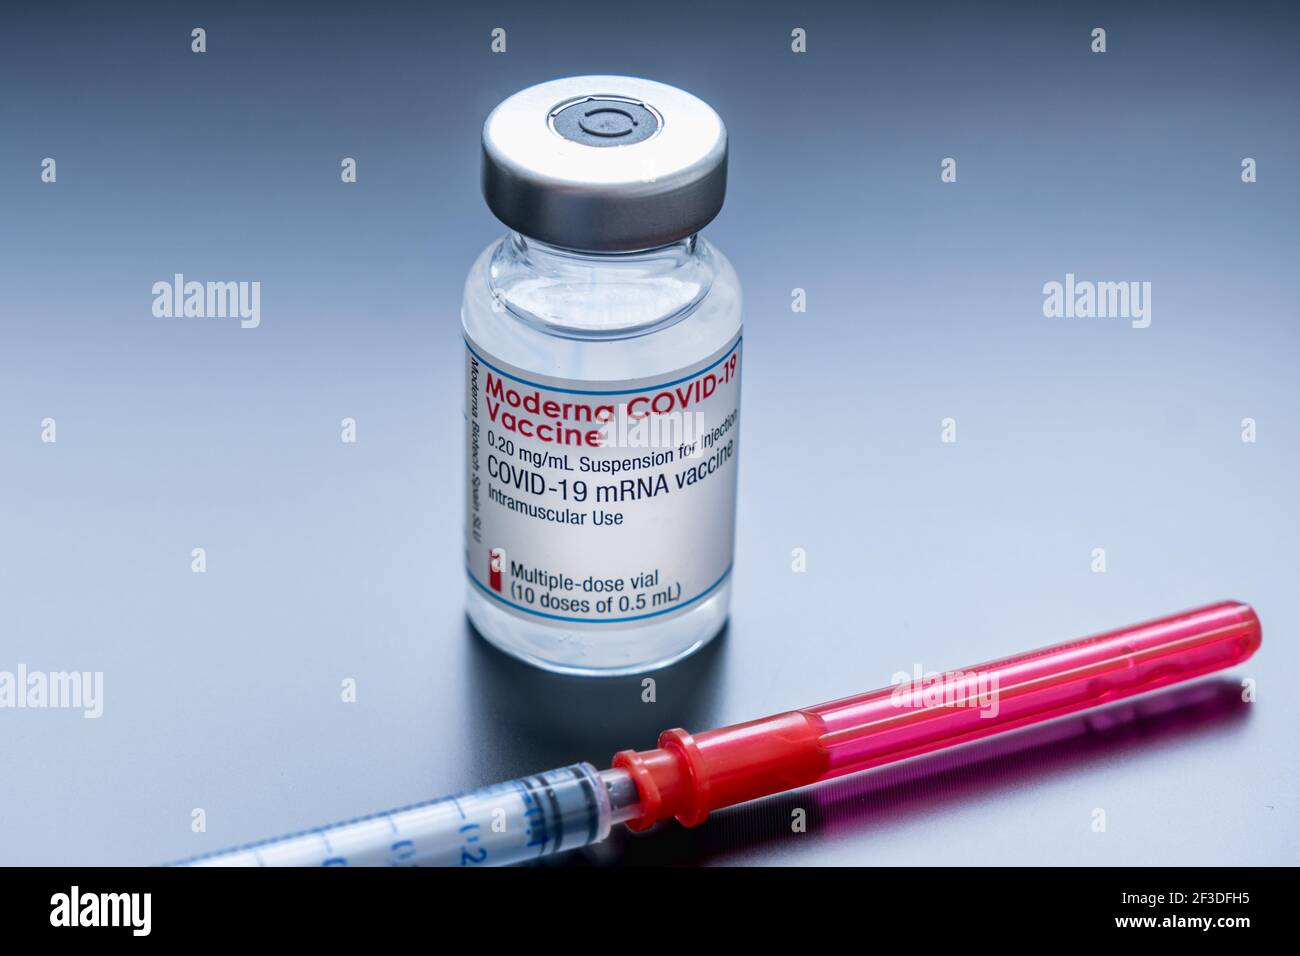 Montreal, CA - 16 March 2021: Vial of Moderna Covid-19 vaccine Stock Photo